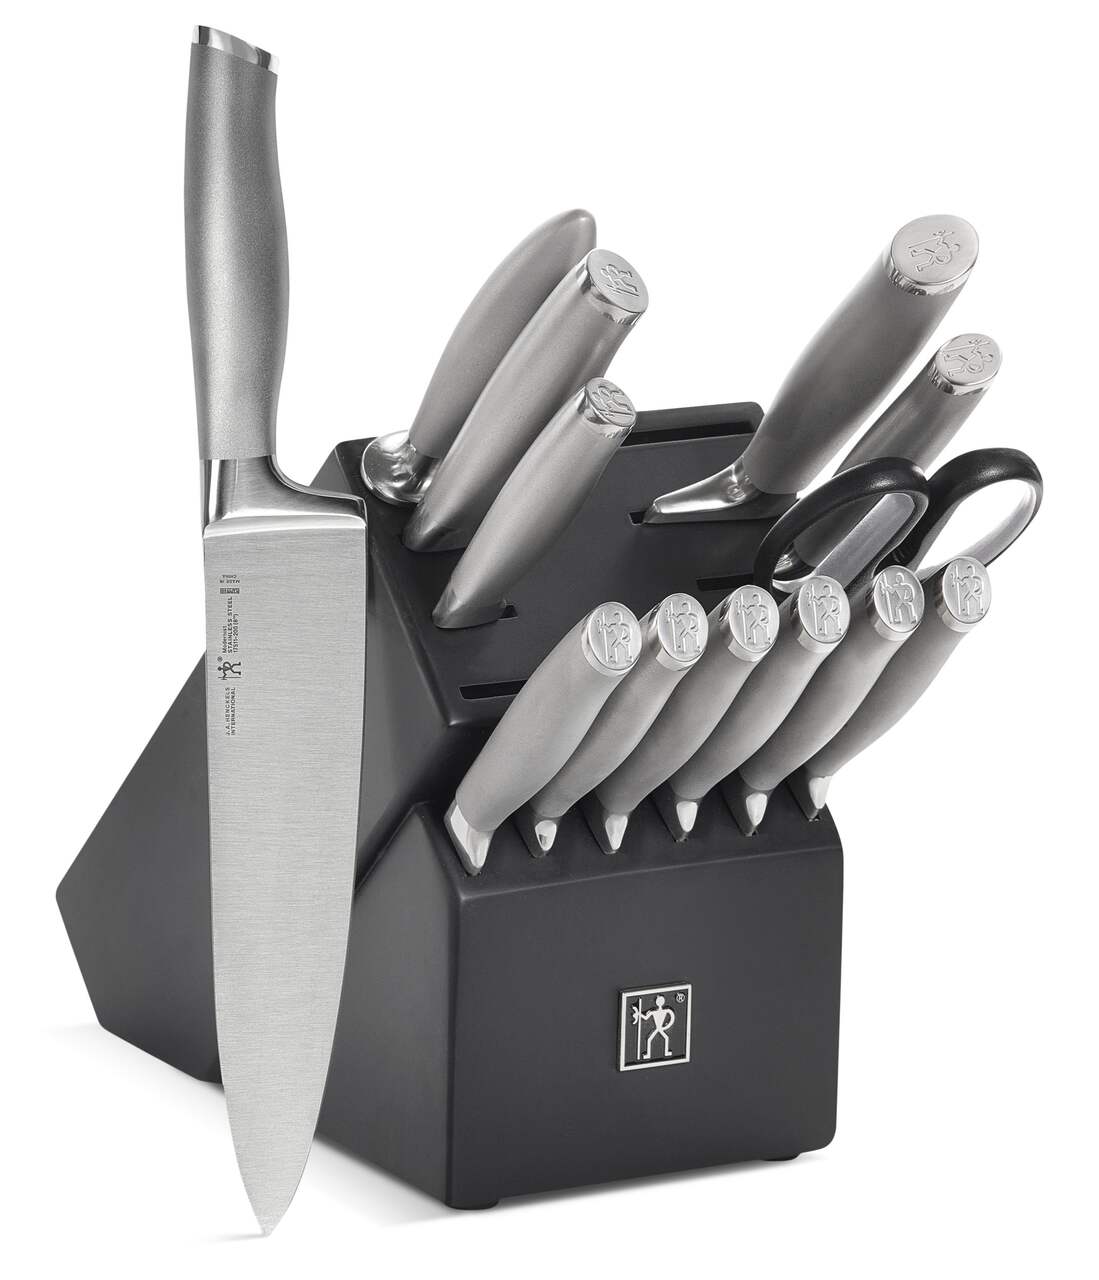 https://media-www.canadiantire.ca/product/living/kitchen/cutlery/1422652/henckels-14-piece-satin-cutlery-set-2f6f97da-edbf-435f-a8e5-b4f95fa42e2d-jpgrendition.jpg?imdensity=1&imwidth=640&impolicy=mZoom